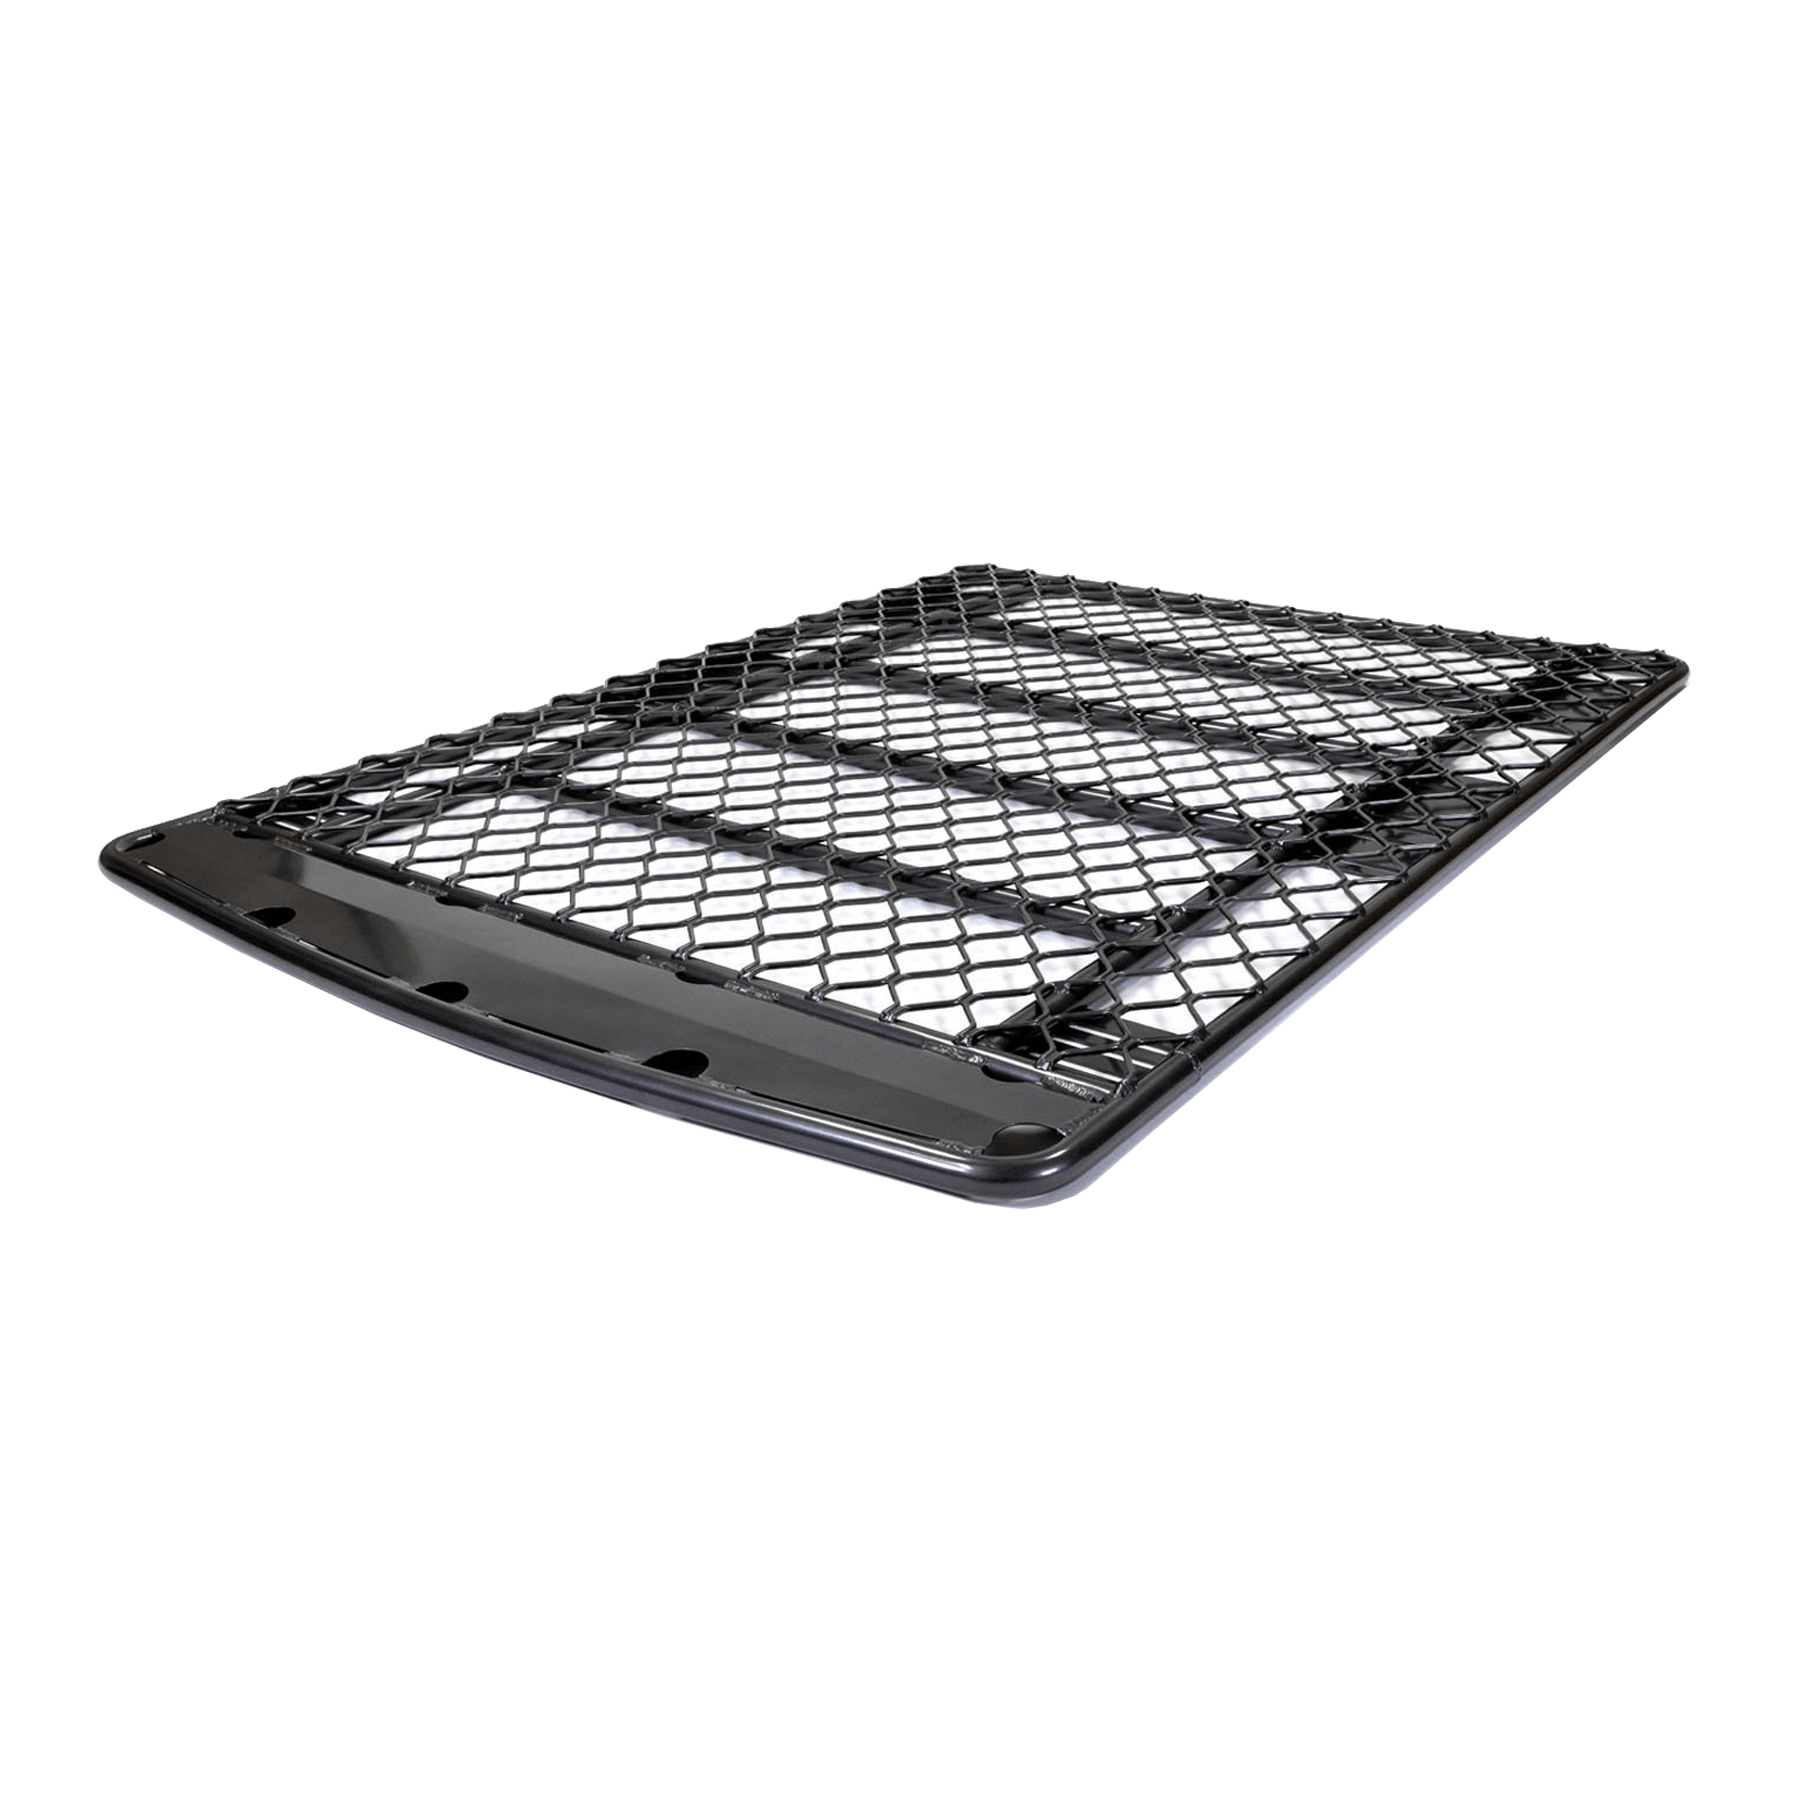 MUX 2014 to 2017+ Flat Alloy Roof Rack - 1.8m x 1.25m